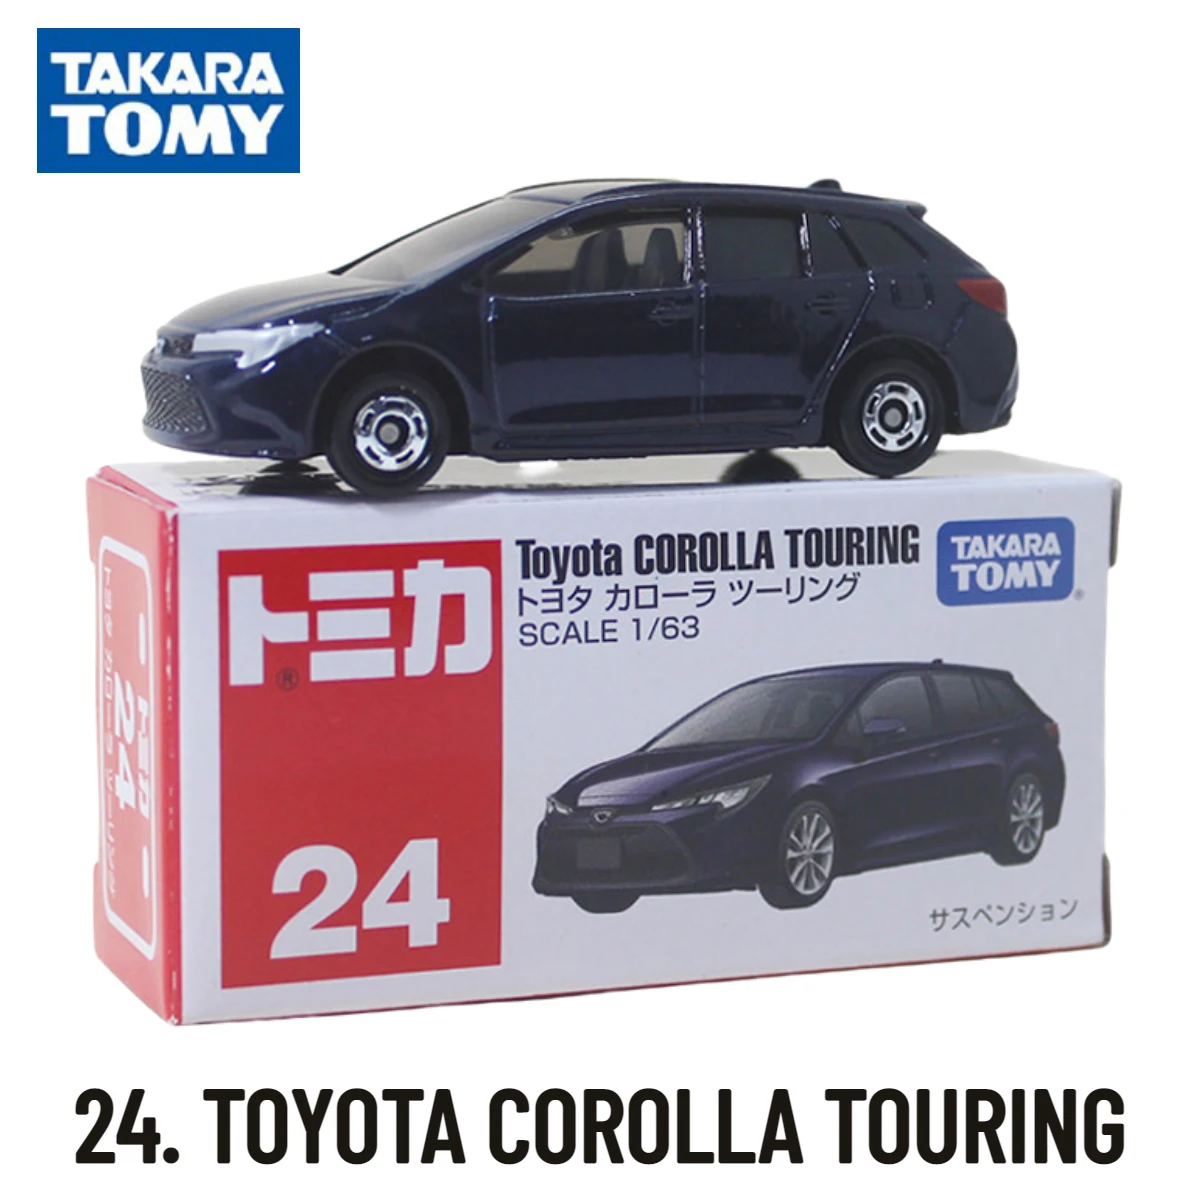 

Takara Tomy Tomica Cars 1-30, Scale Model TOYOTA COROLLA TOURING Replica, Kids Room Decor Xmas Gift Toys for Baby Boys